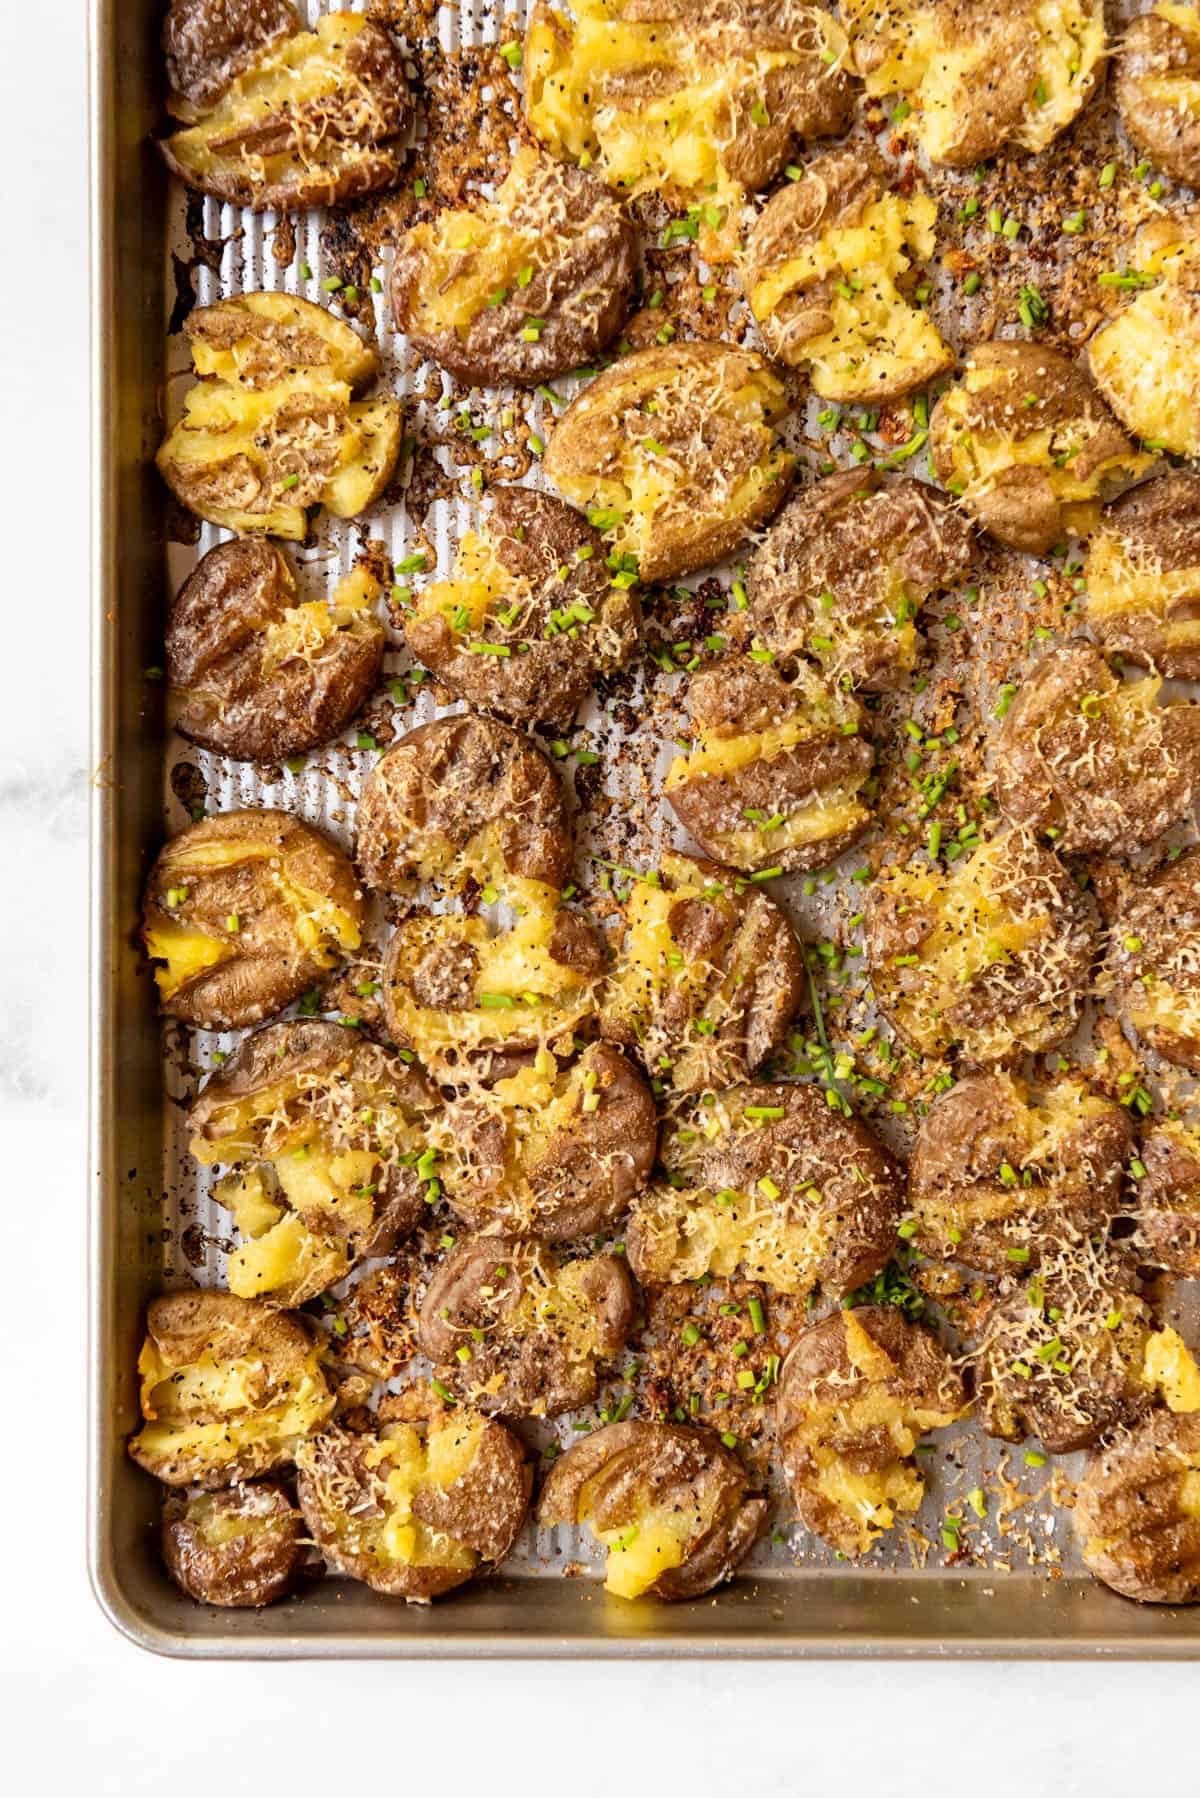 An image of crispy smashed potatoes with parmesan on a baking sheet.